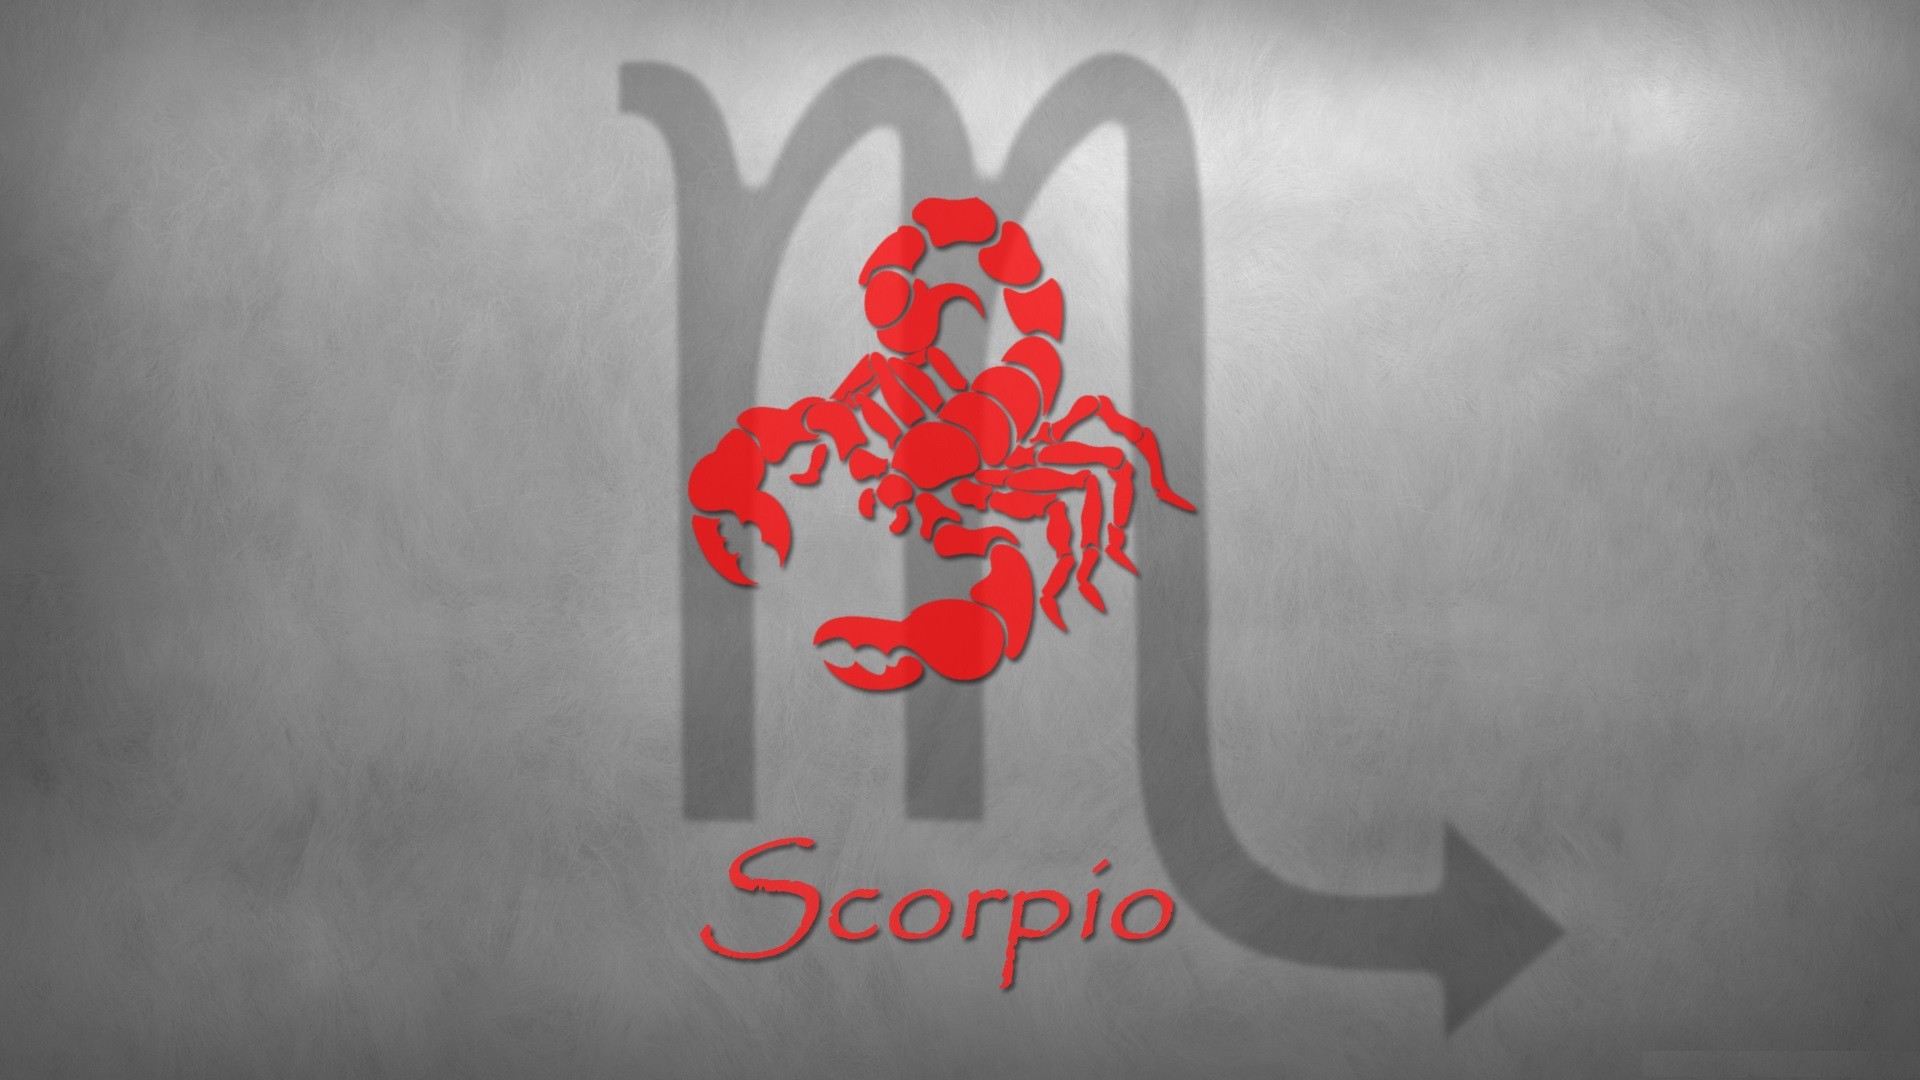 1920x1080 Zodiac, Signs, Sign, Scorpio, High, Definition, Wallpaper, For, Desktop,  Background, Download, Photos, Free, Download Wallpapers, Display, Artwork,  ...